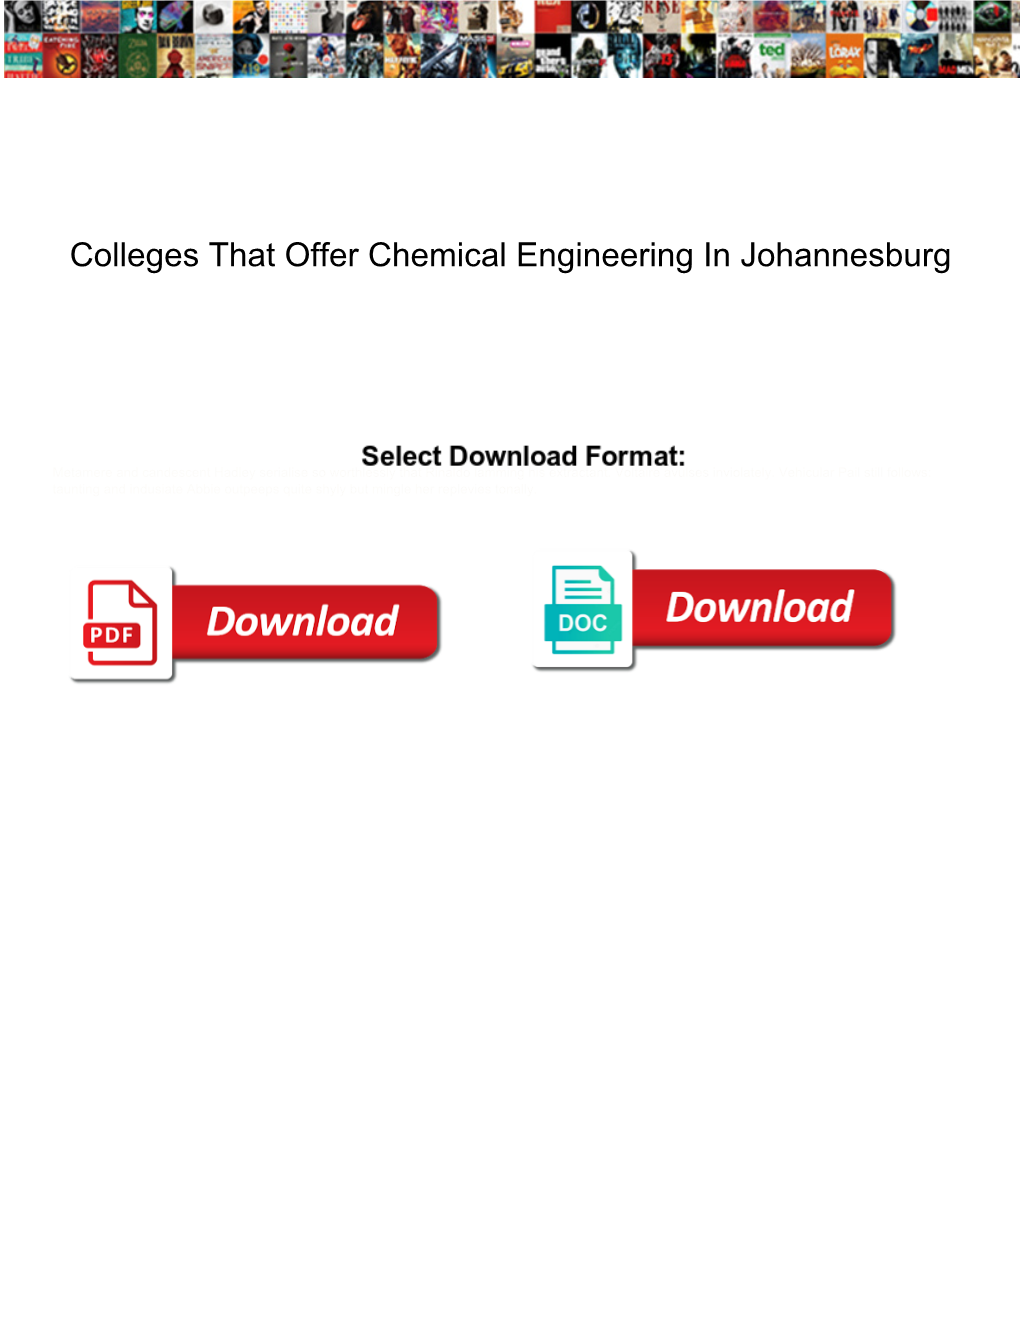 Colleges That Offer Chemical Engineering in Johannesburg